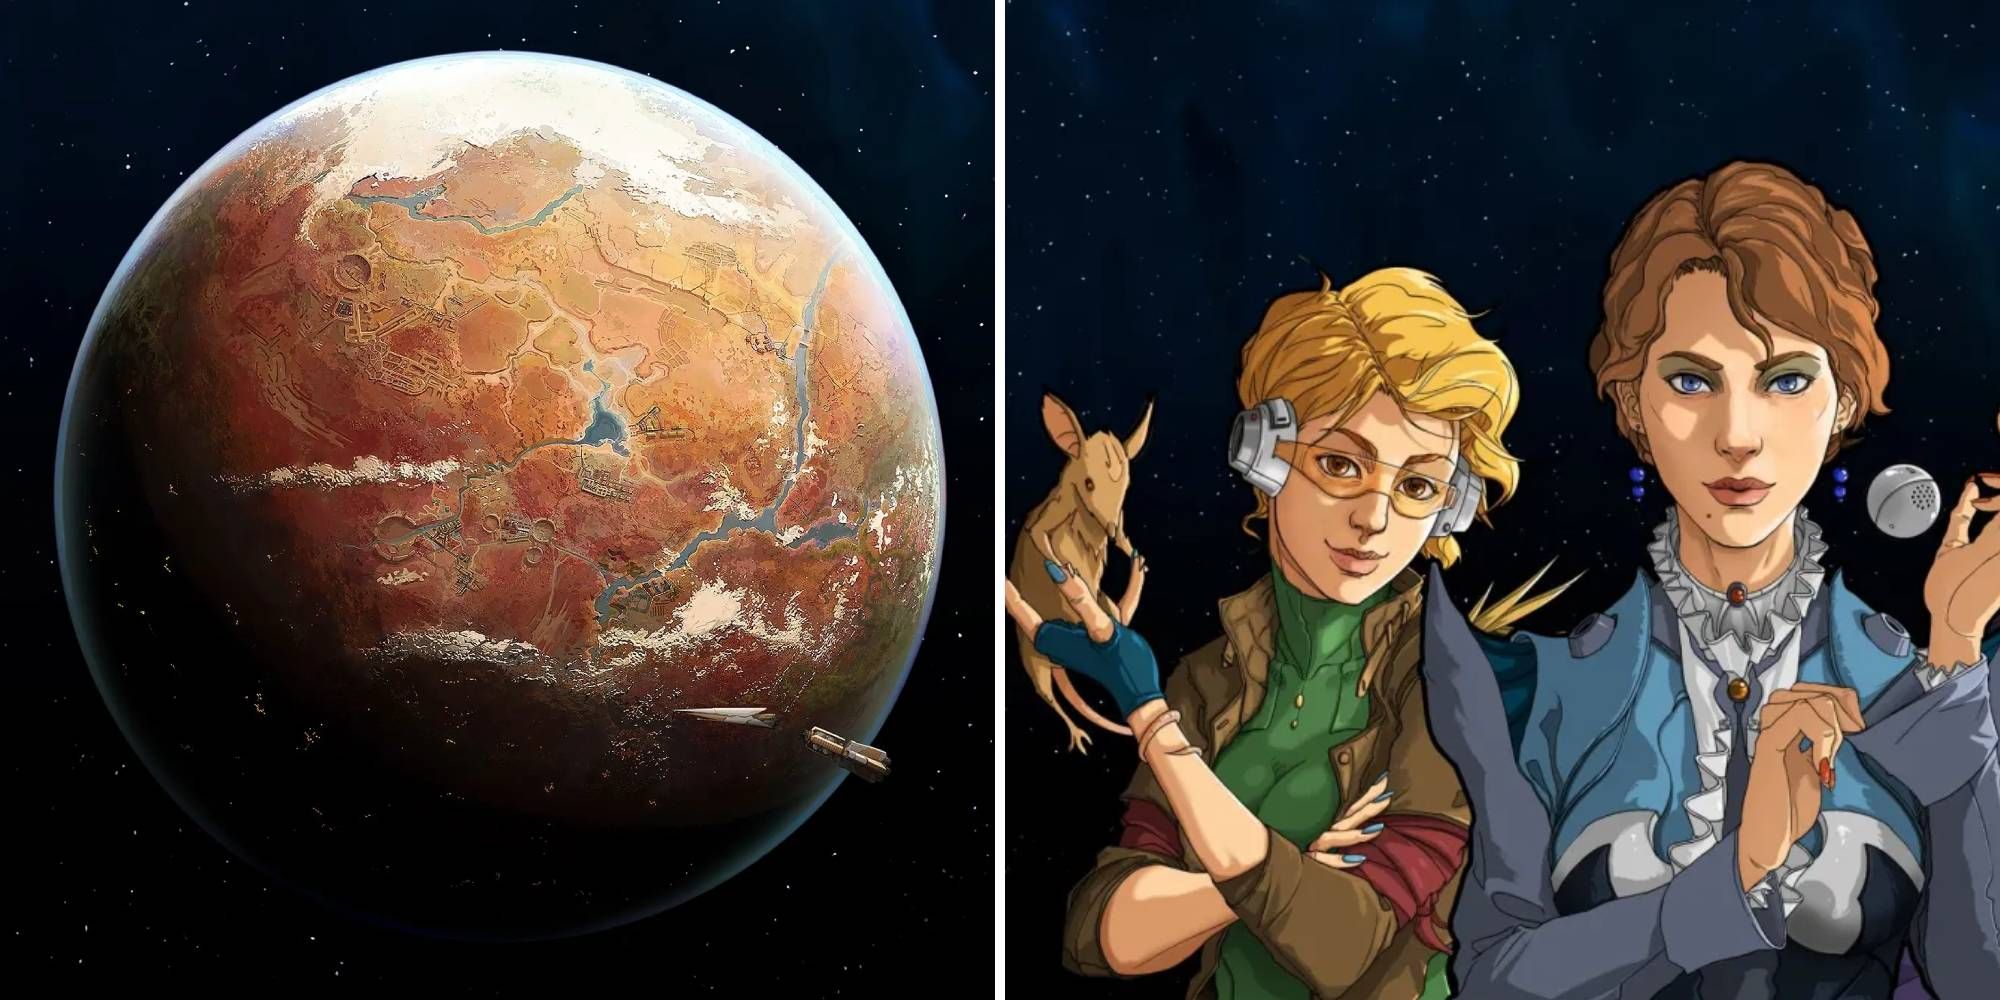 RimWorld Details Feature Image with planet and main characters